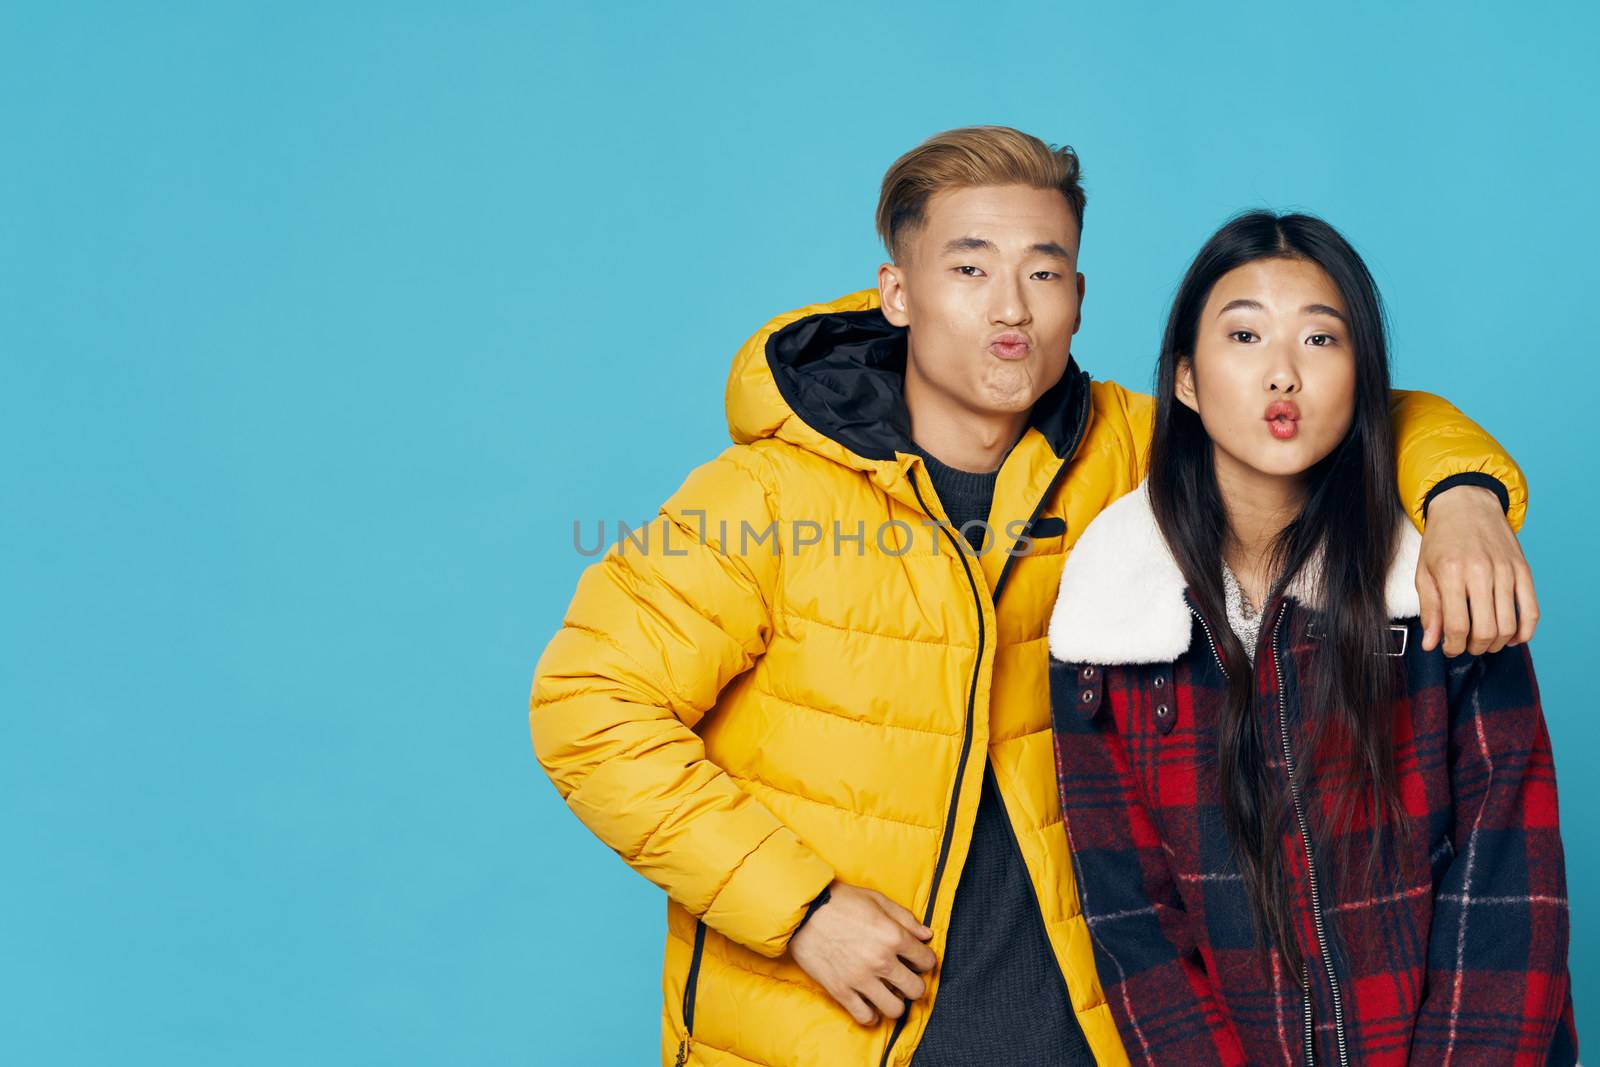 Man in a yellow jacket Asian appearance and woman air kiss love